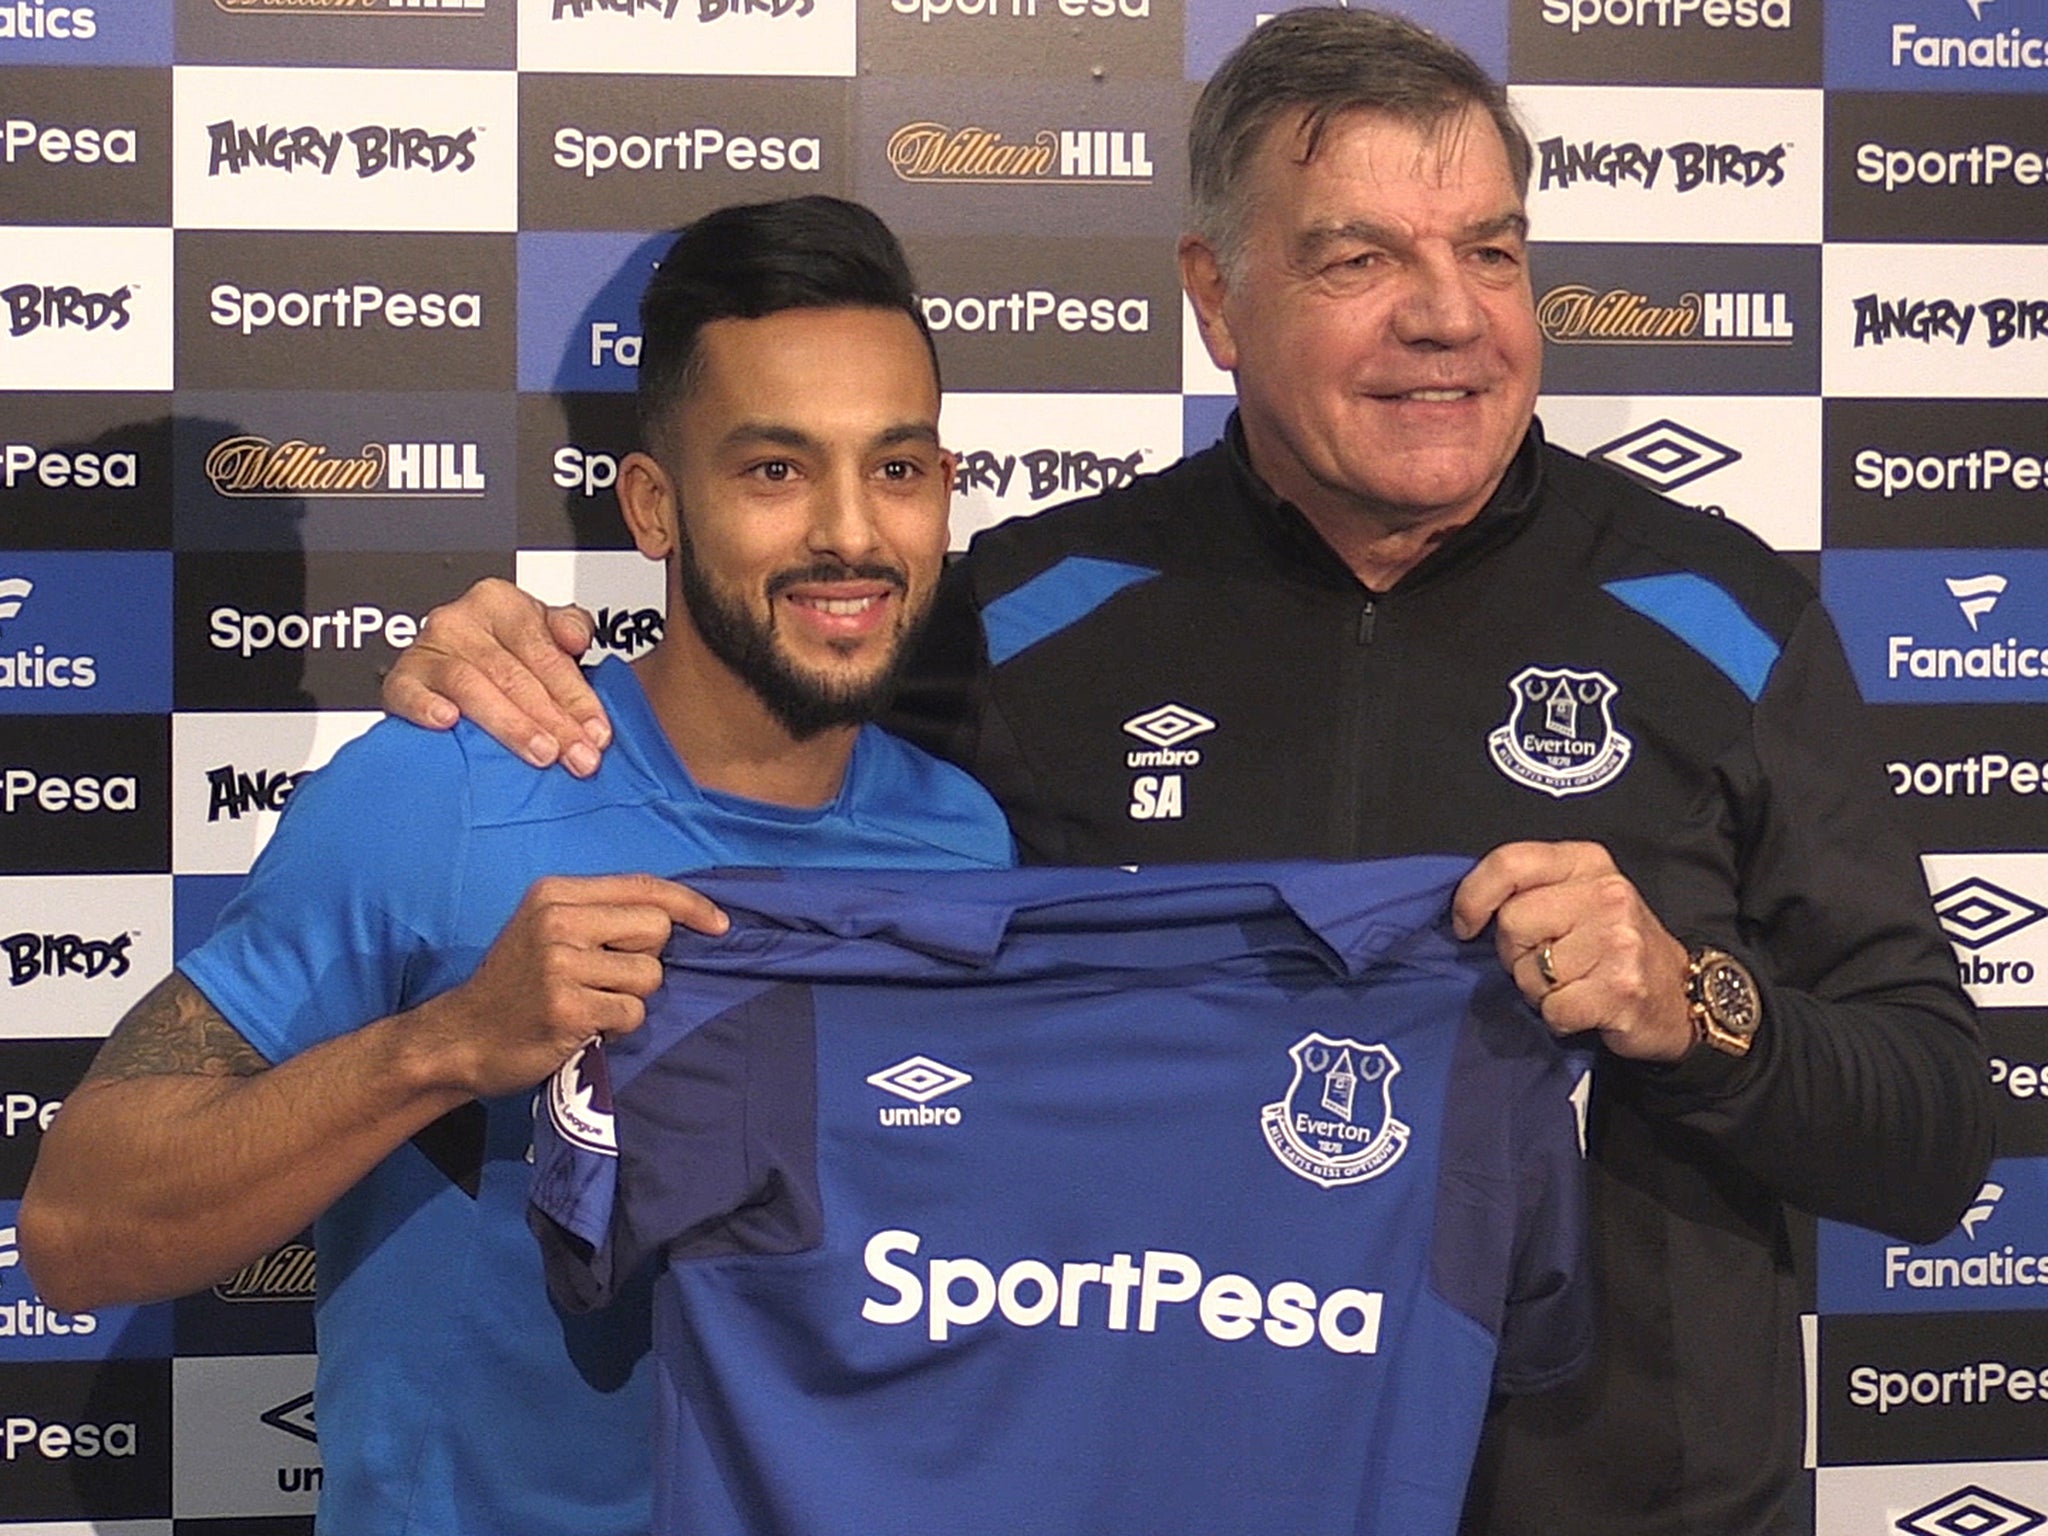 Sam Allardyce unveils Theo Walcott as an Everton player after his move from Arsenal